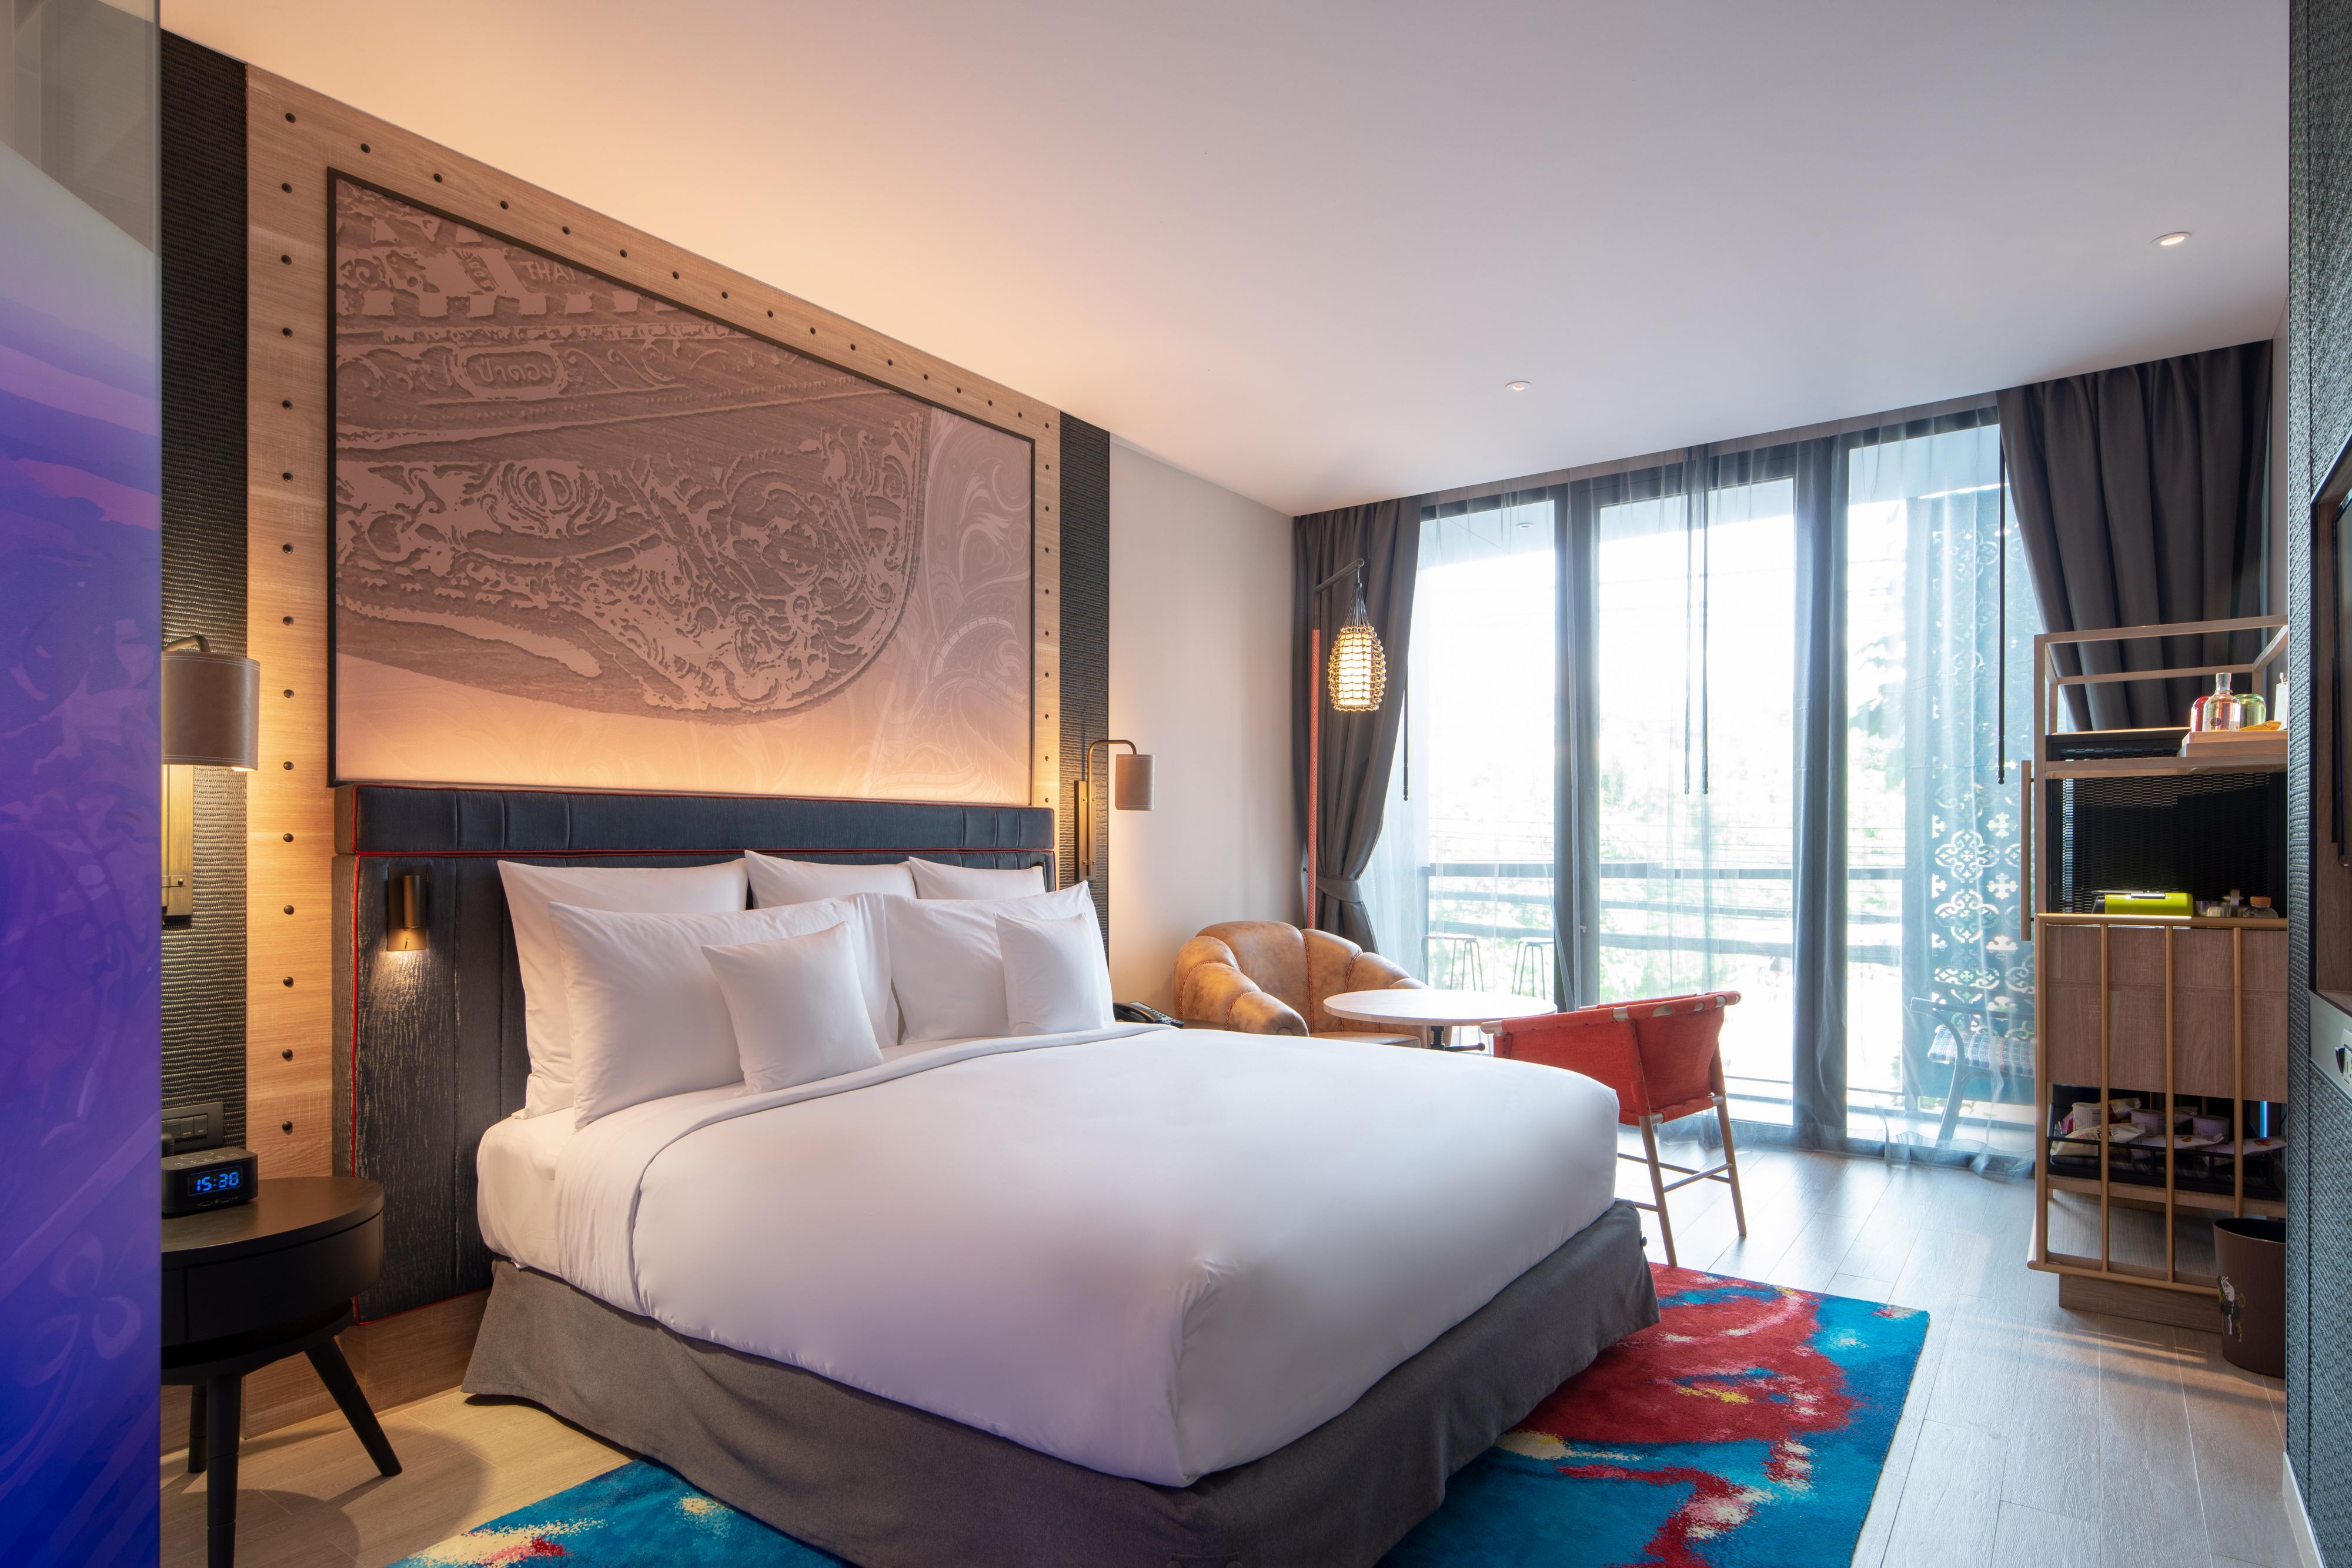 Our North Patong boutique hotel features 180 stylishly designed rooms, each drawing inspiration from Patong's tropical forests, lively neon lights, and the rich heritage of a fishing village. Our spacious accommodations offer a seamless blend of comfort and style, immersing you in the unique and dynamic atmosphere of this captivating destination.